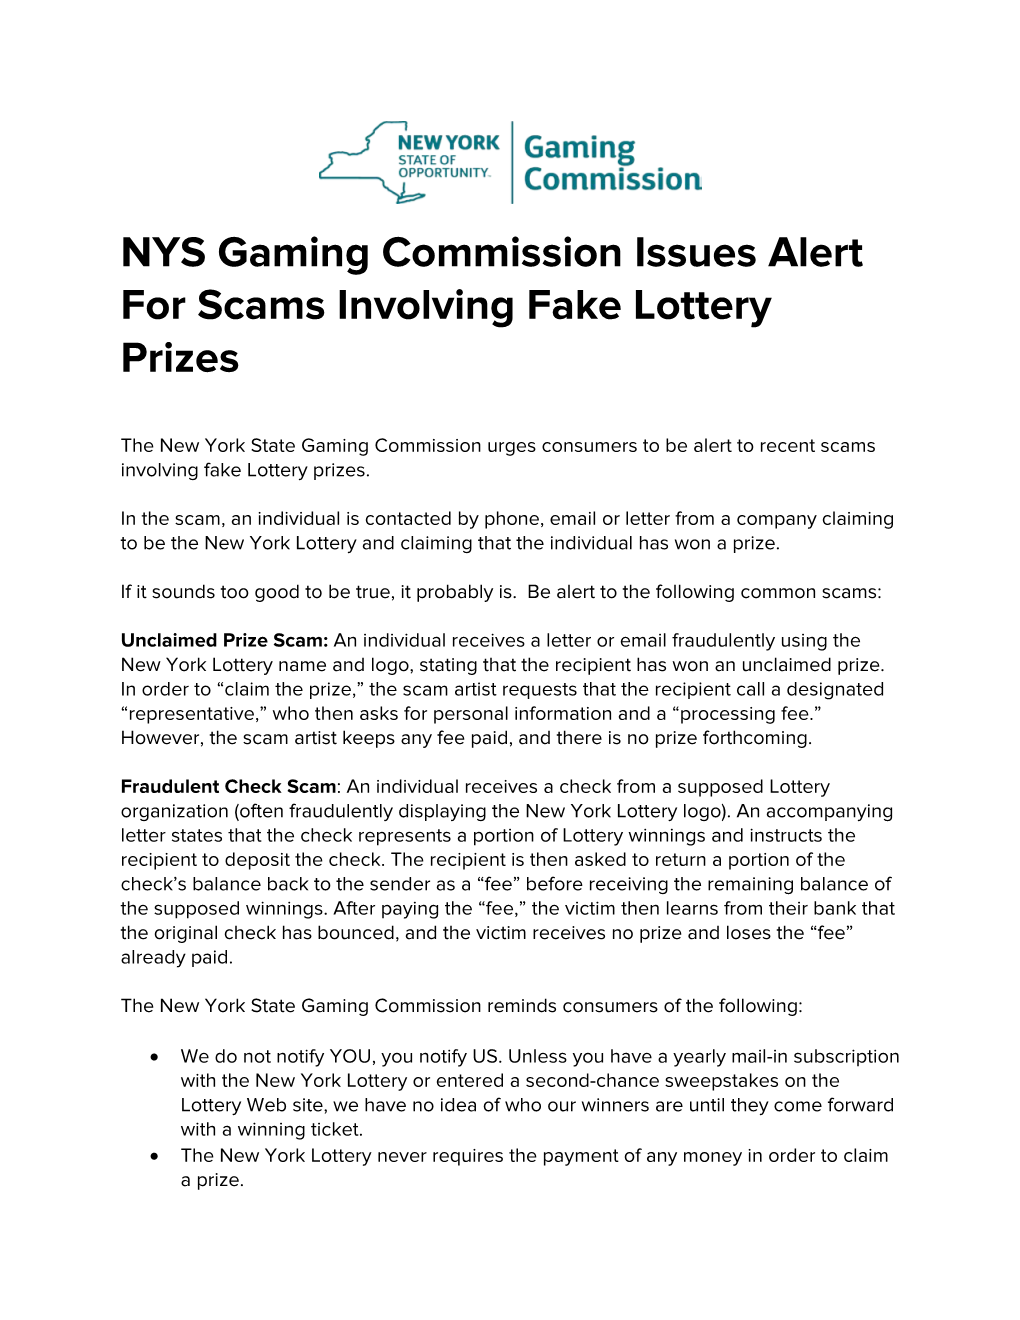 NYS Gaming Commission Issues Alert for Scams Involving Fake Lottery Prizes